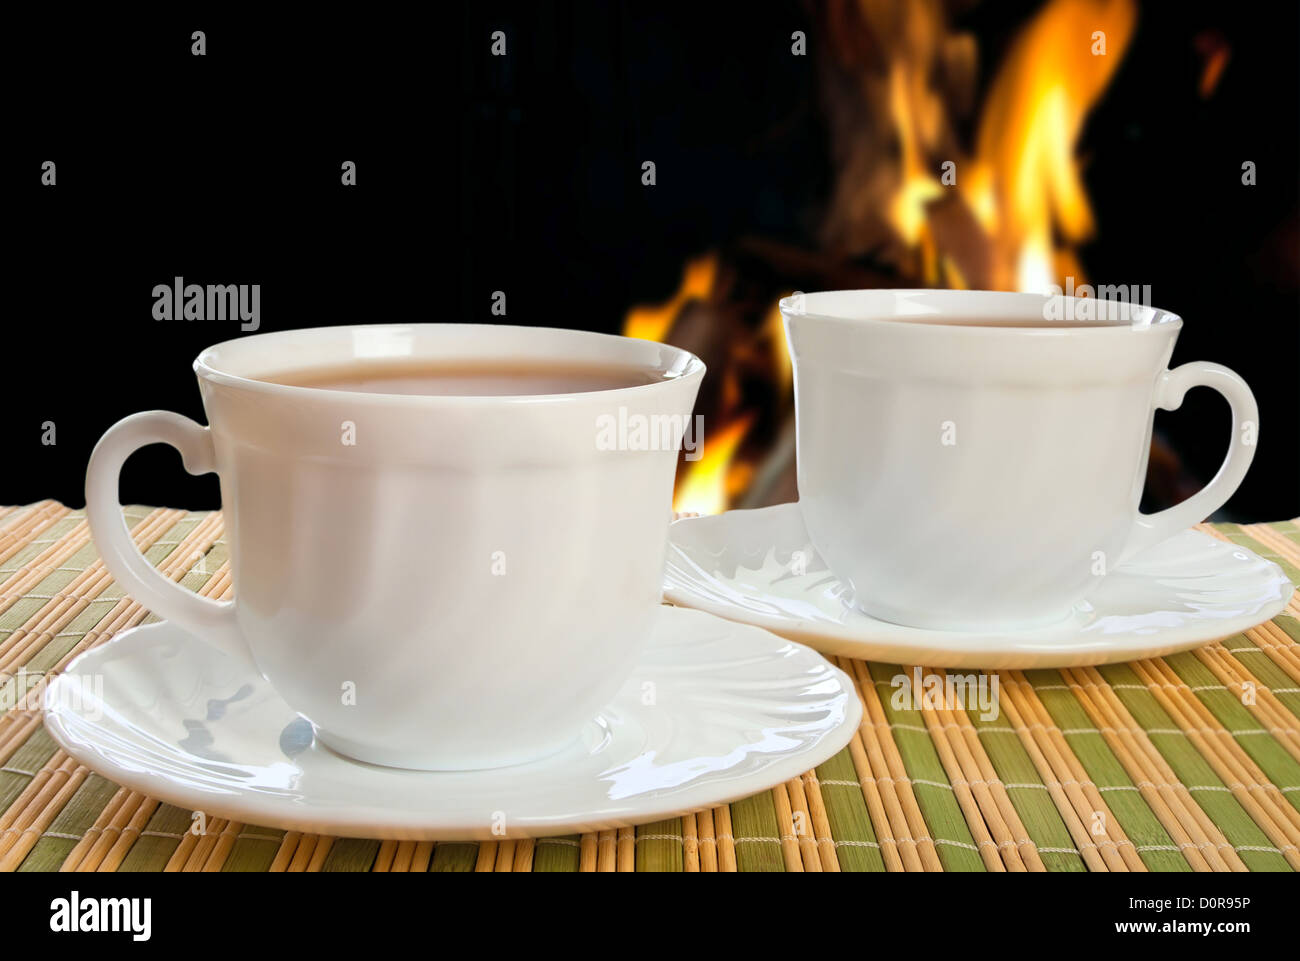 Two teacups on fire background. Stock Photo